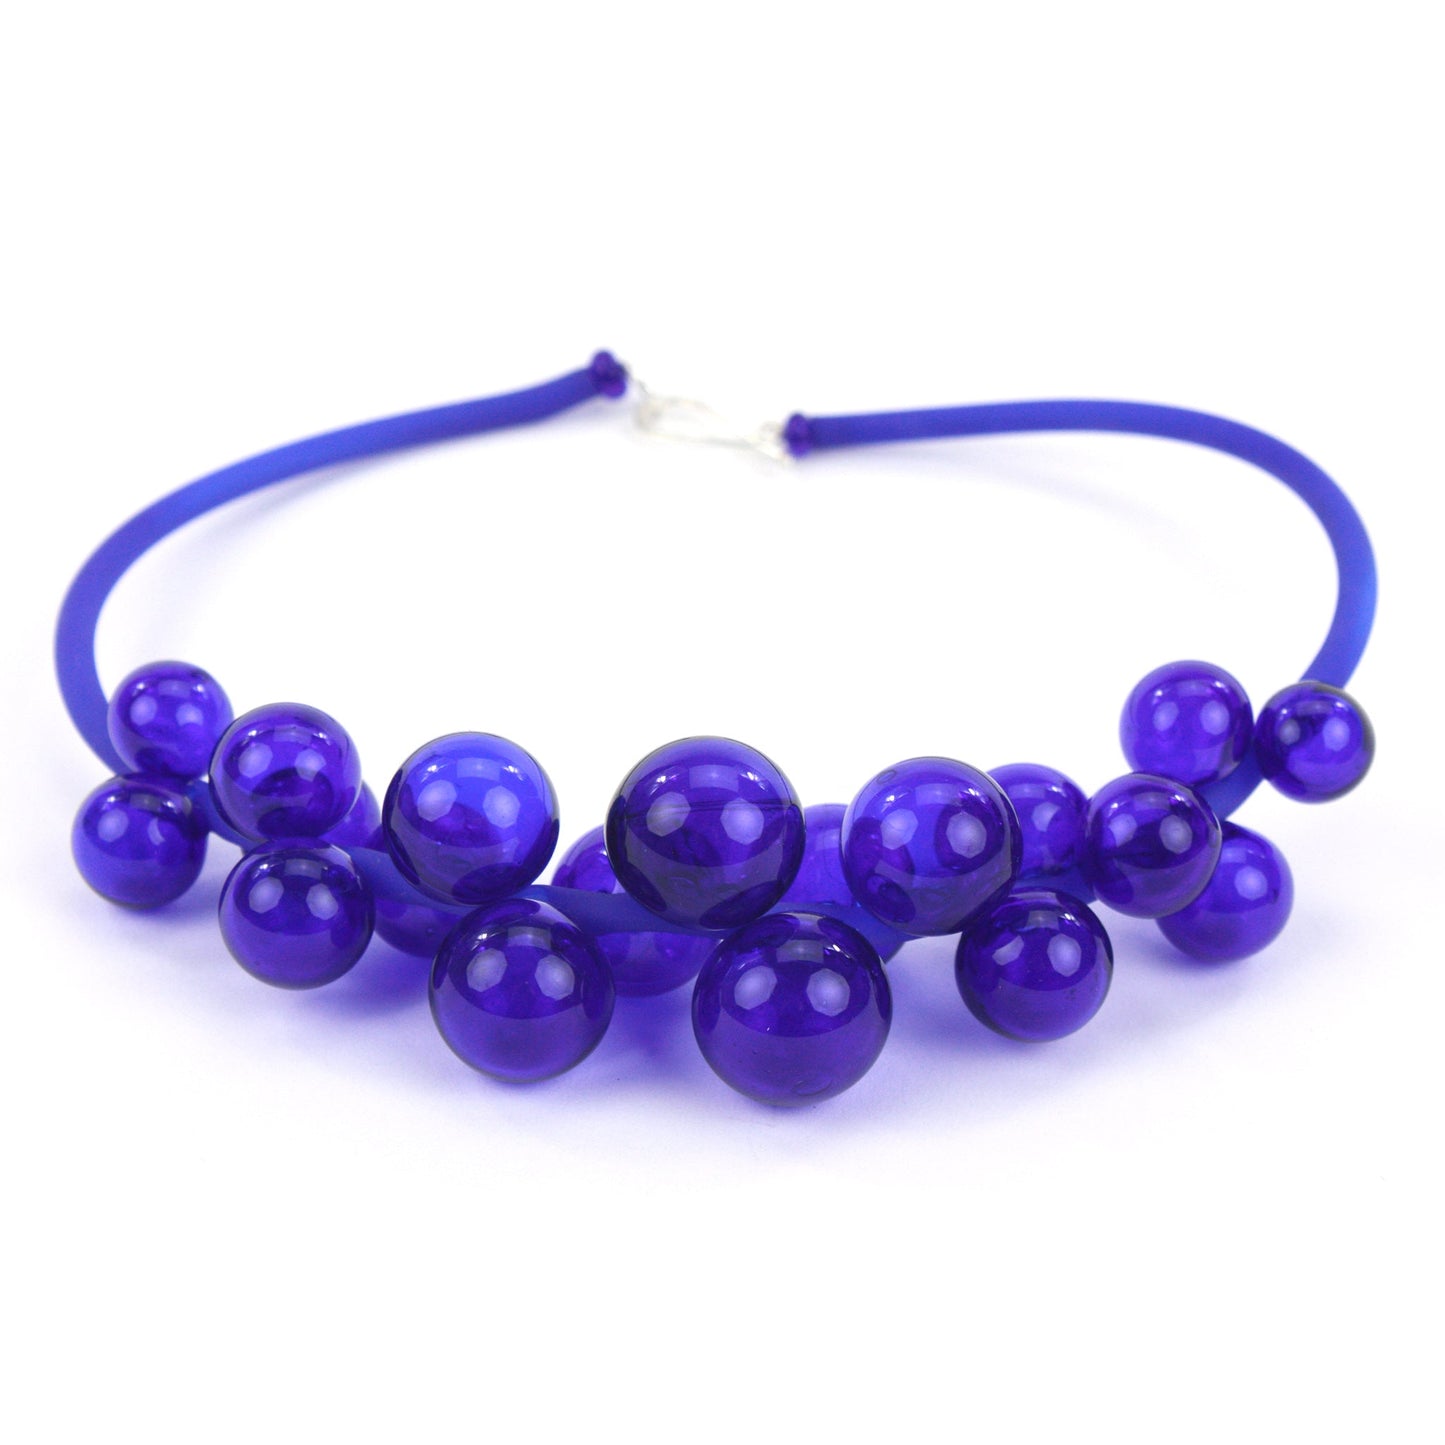 Chroma Bolla Necklace in Cobalt